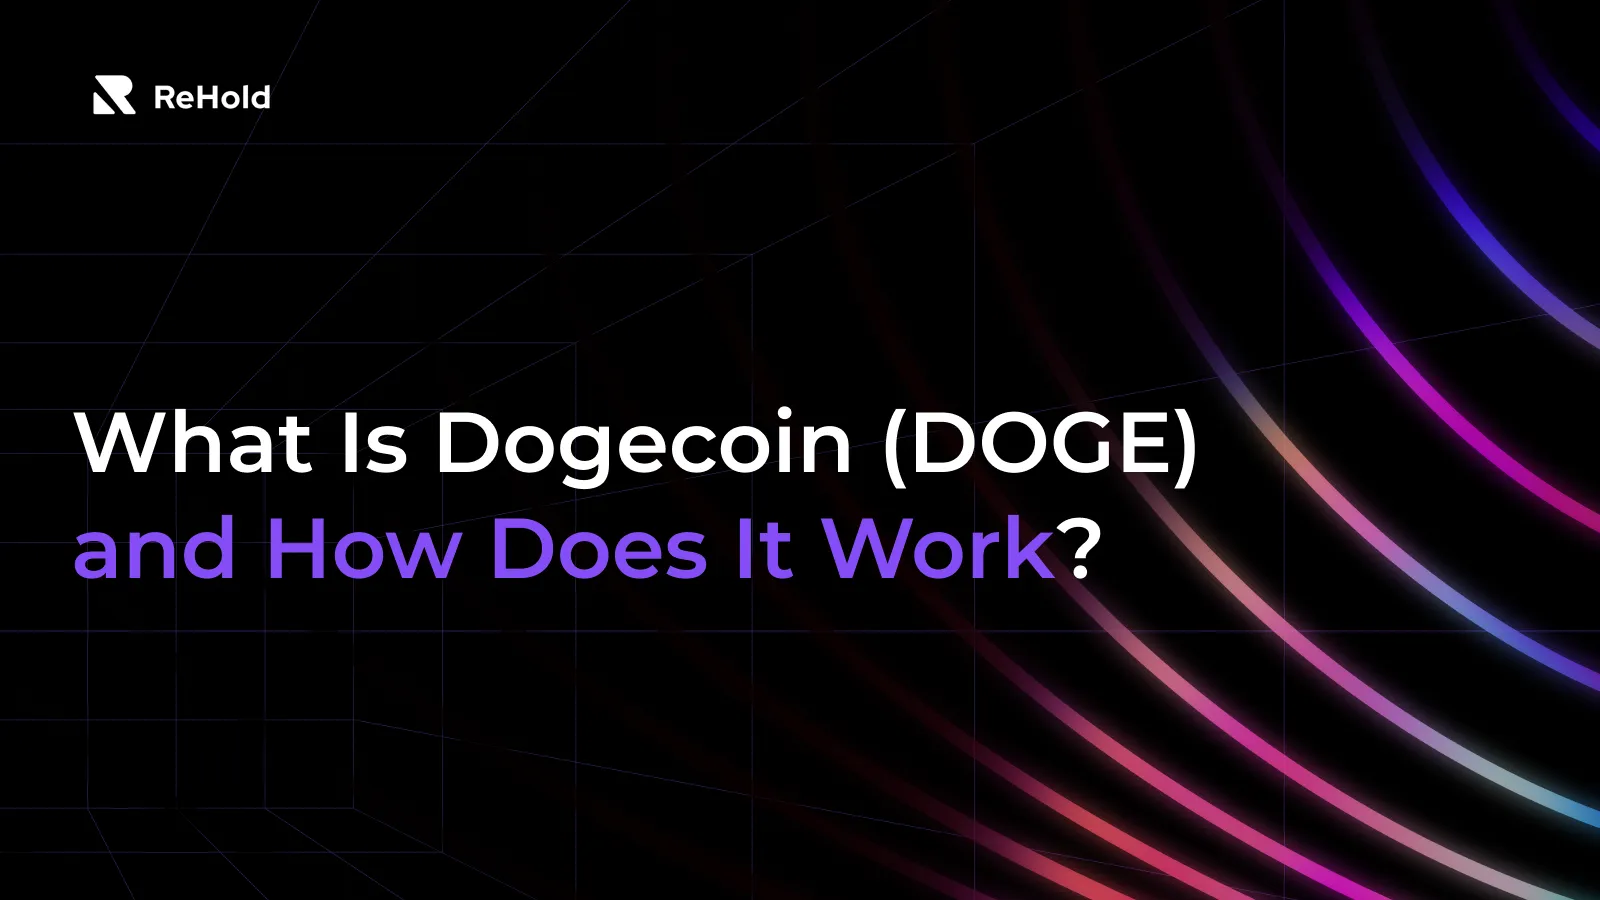 What Is Dogecoin (DOGE) and How Does It Work?